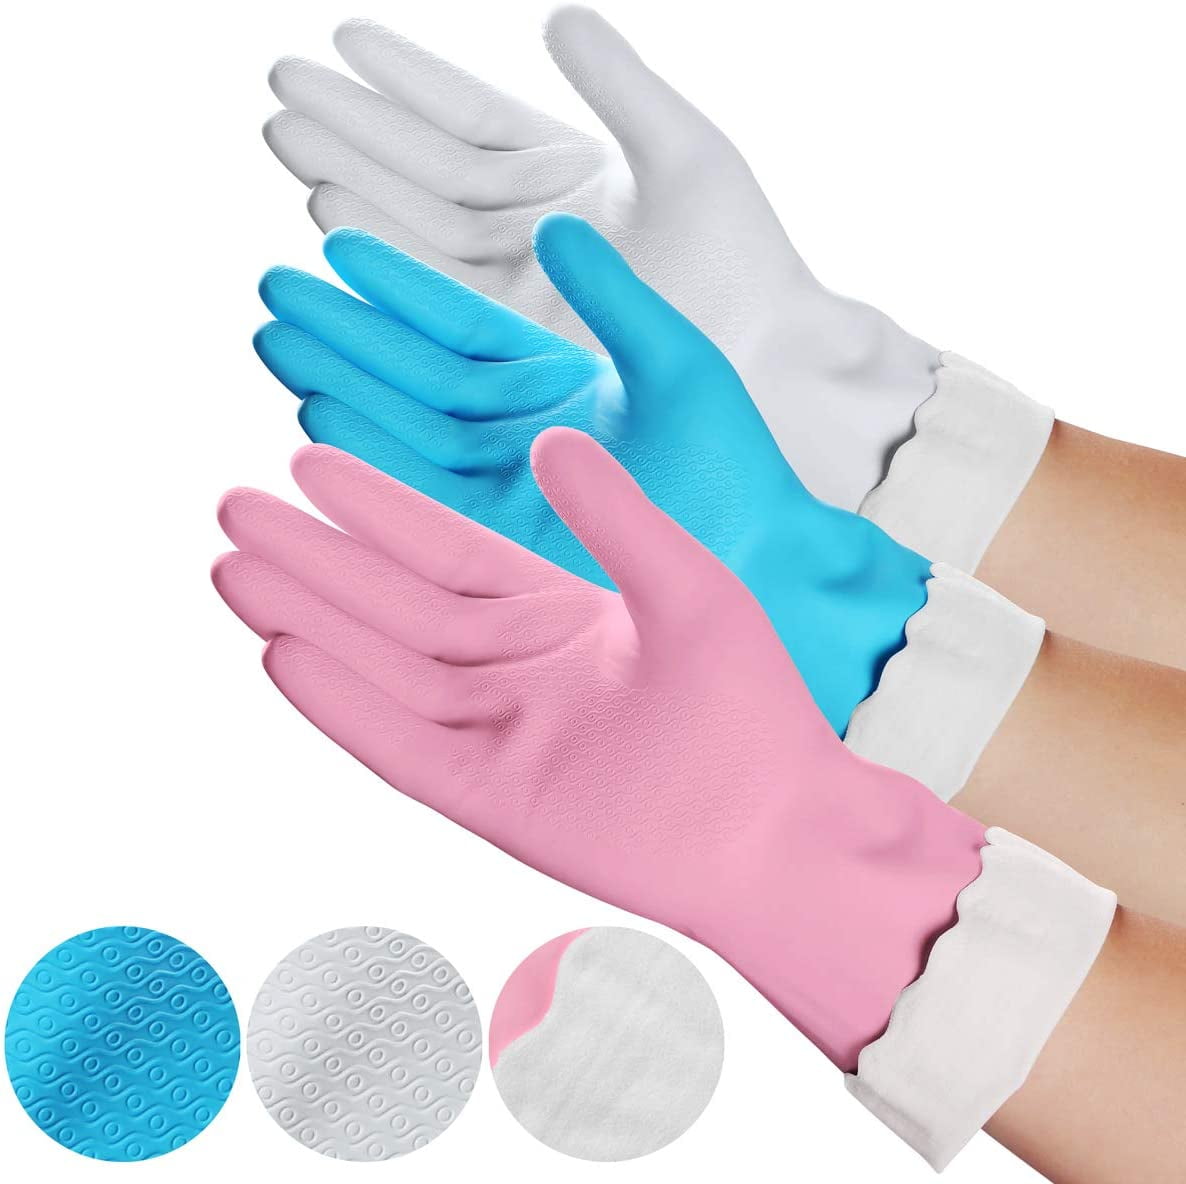 Details about   leaning Gloves Dish Washing  Gloves  Wash Dishes For Toliet Bathroom Housework 